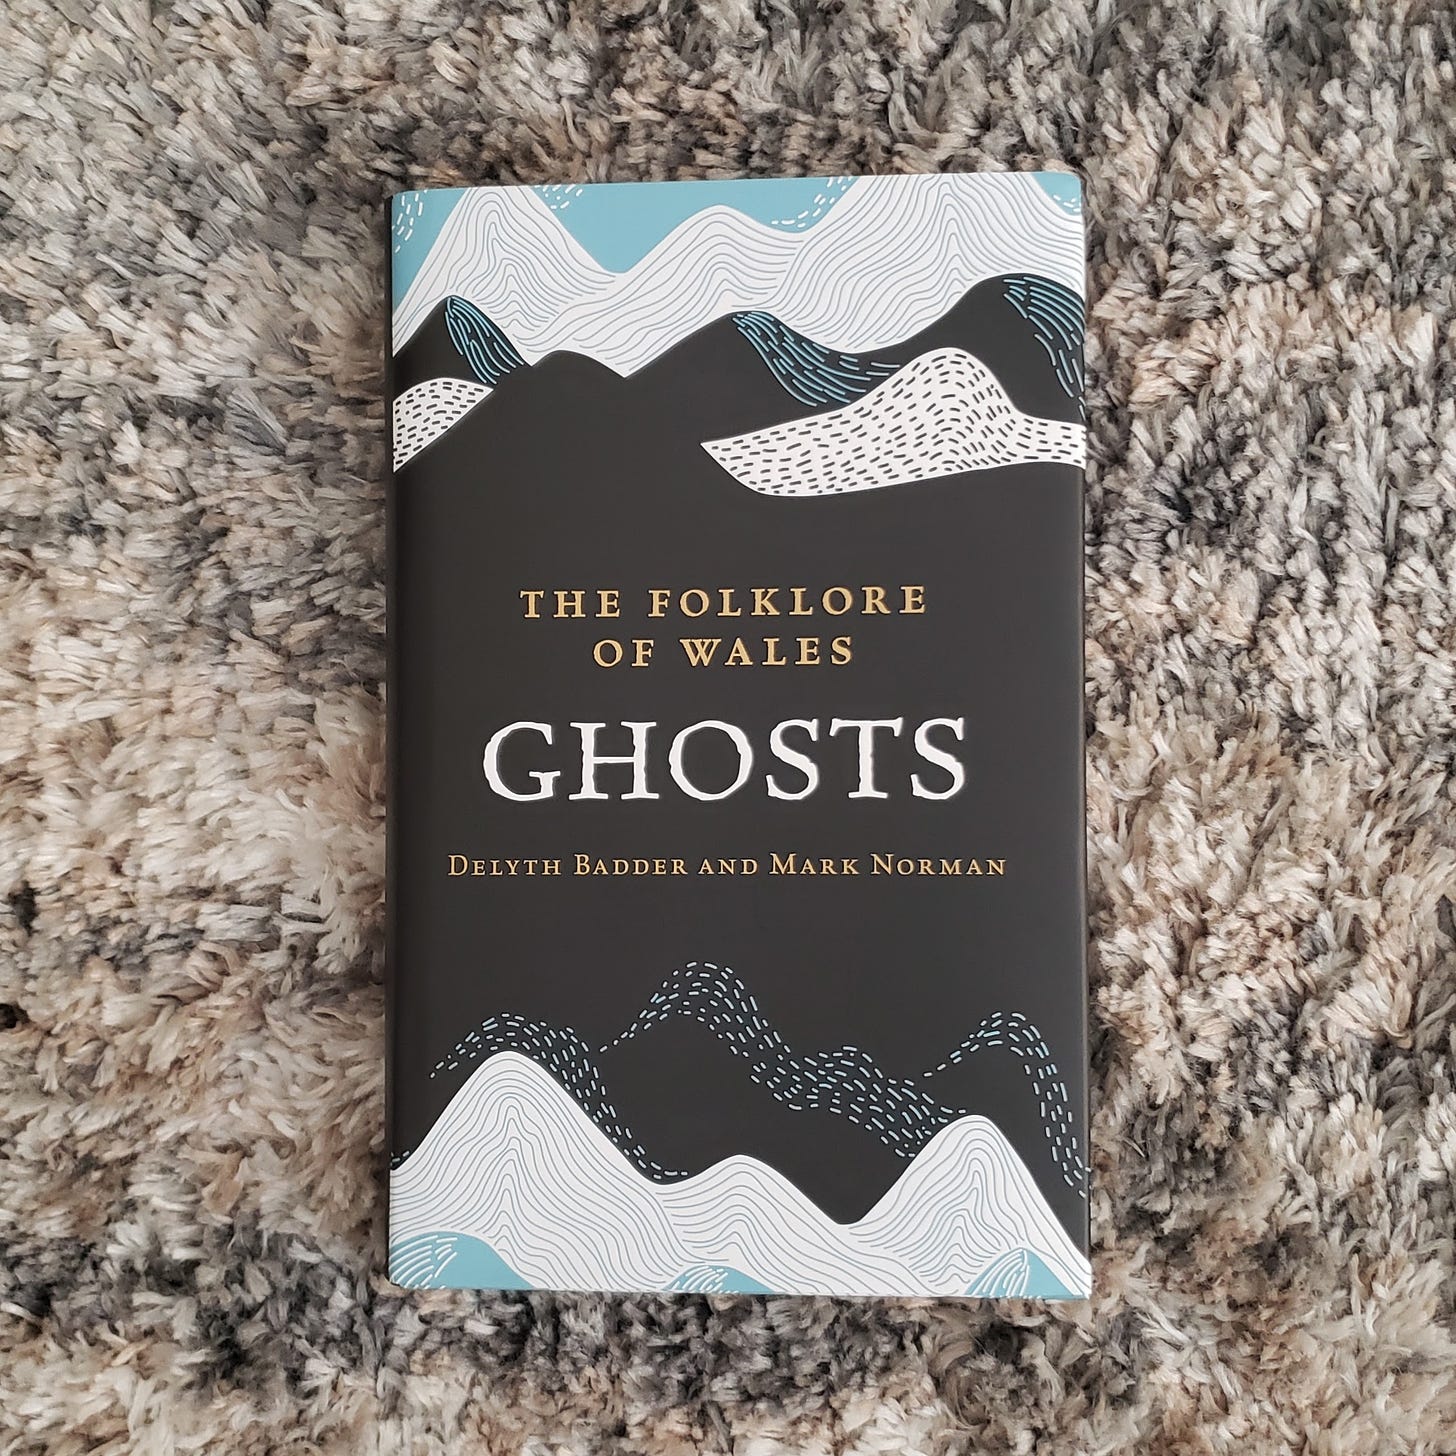 Photo of book, The Folklore of Wales: Ghosts by Delyth Badder and Mark Norman.